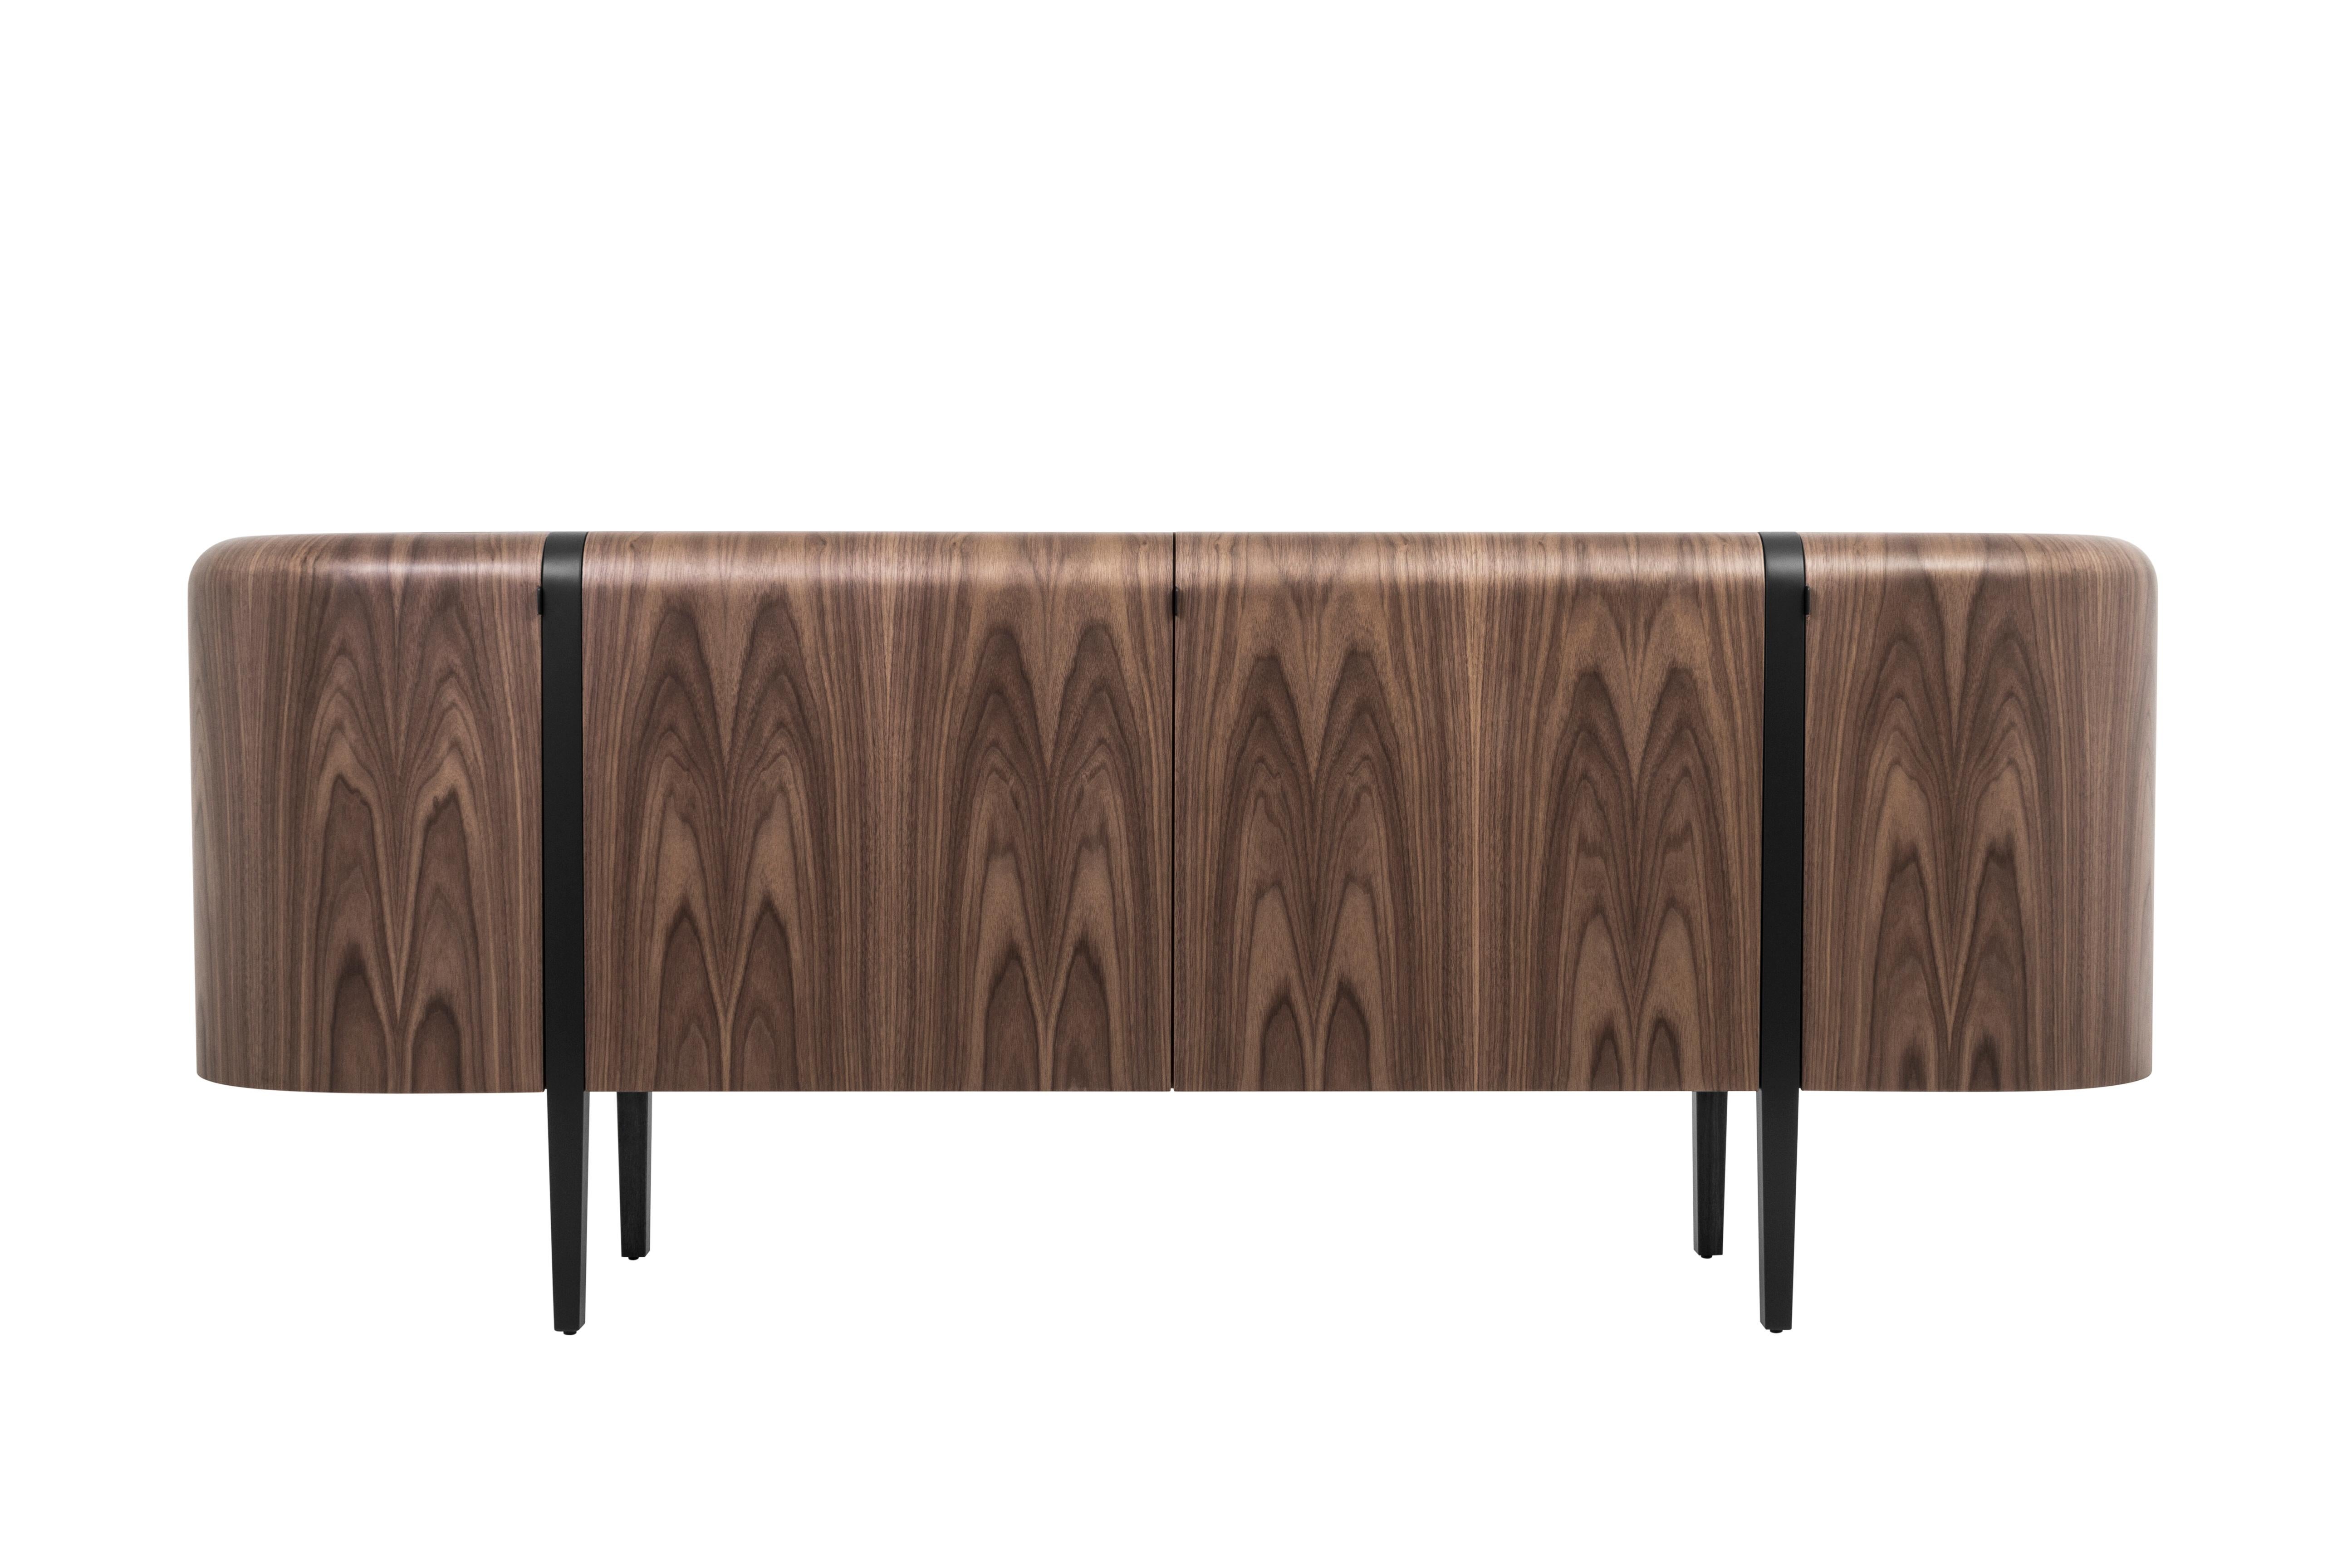 Crafted from American walnut veneer with a natural finish, the Lola sideboard is a harmonious element that seamlessly blends contemporary design with modernism. The round purity of this sideboard creates a visual effect that is both stunning and